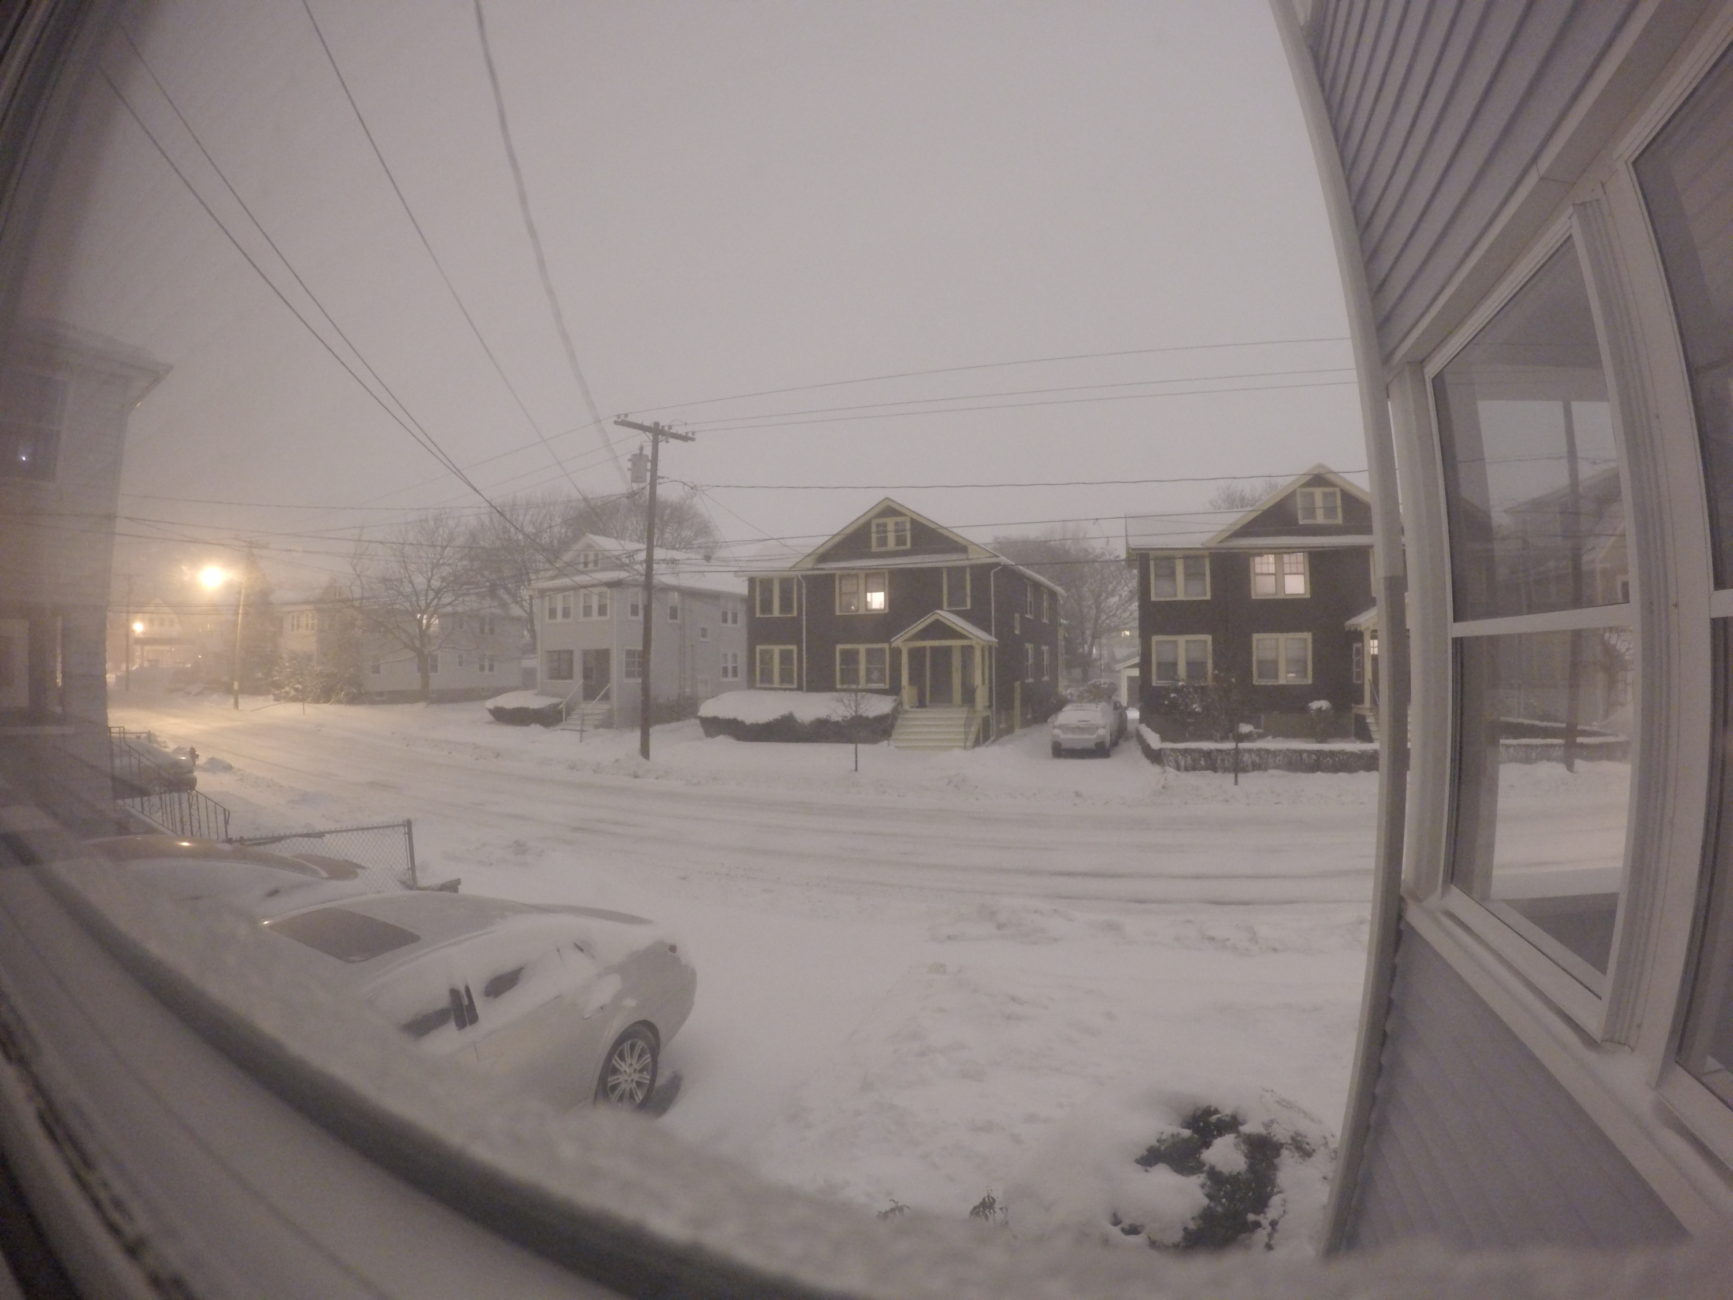 WINTER STORM TIME LAPSE